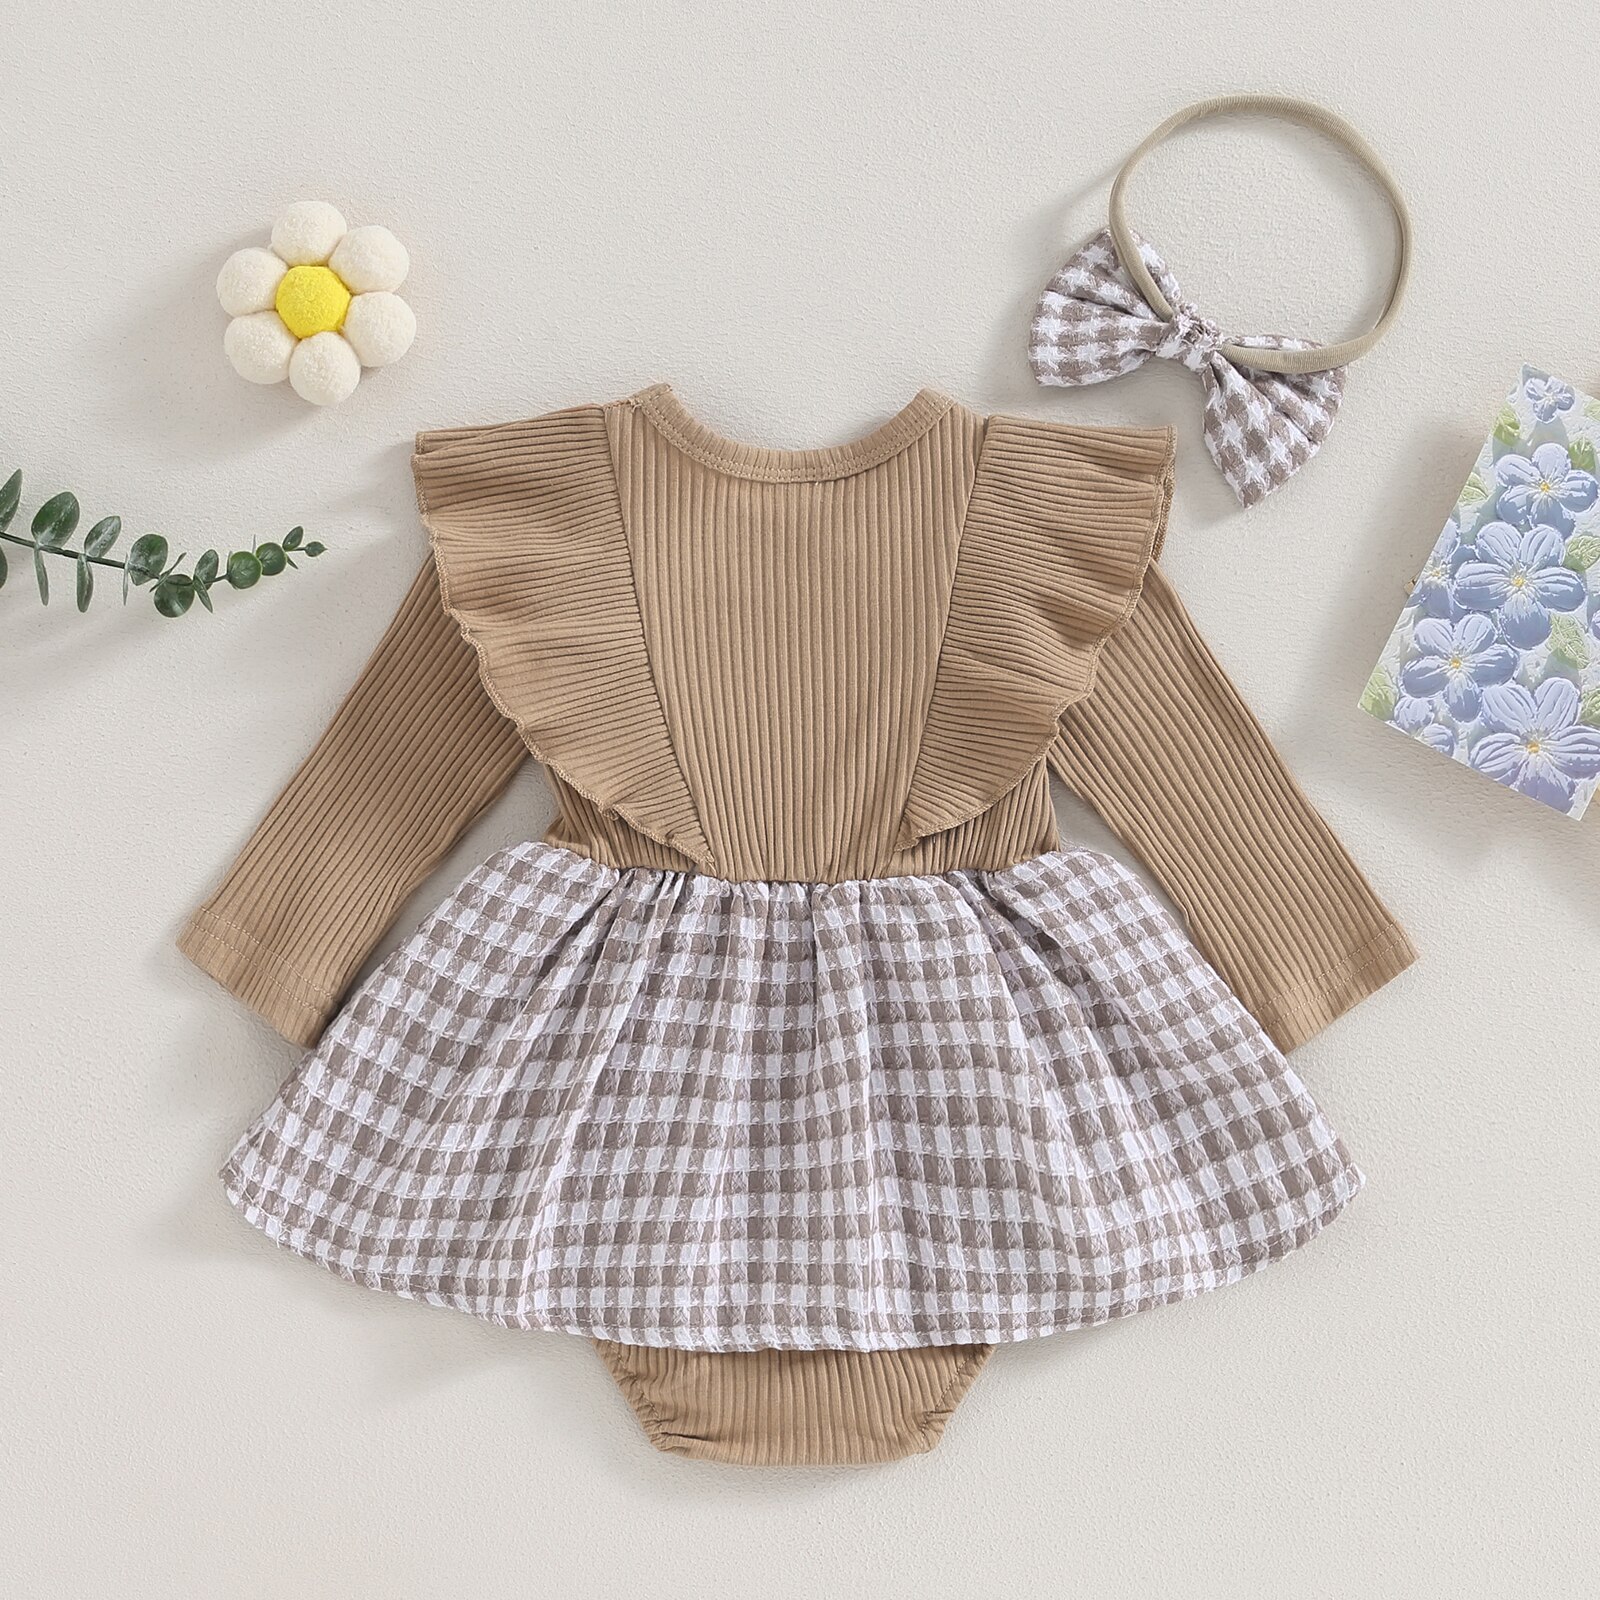 Pudcoco-Baby-Girls-2-Piece-Outfits-Houndstooth-Print-Long-Sleeves-Romper-Dress-and-Cute-Headband-for-2